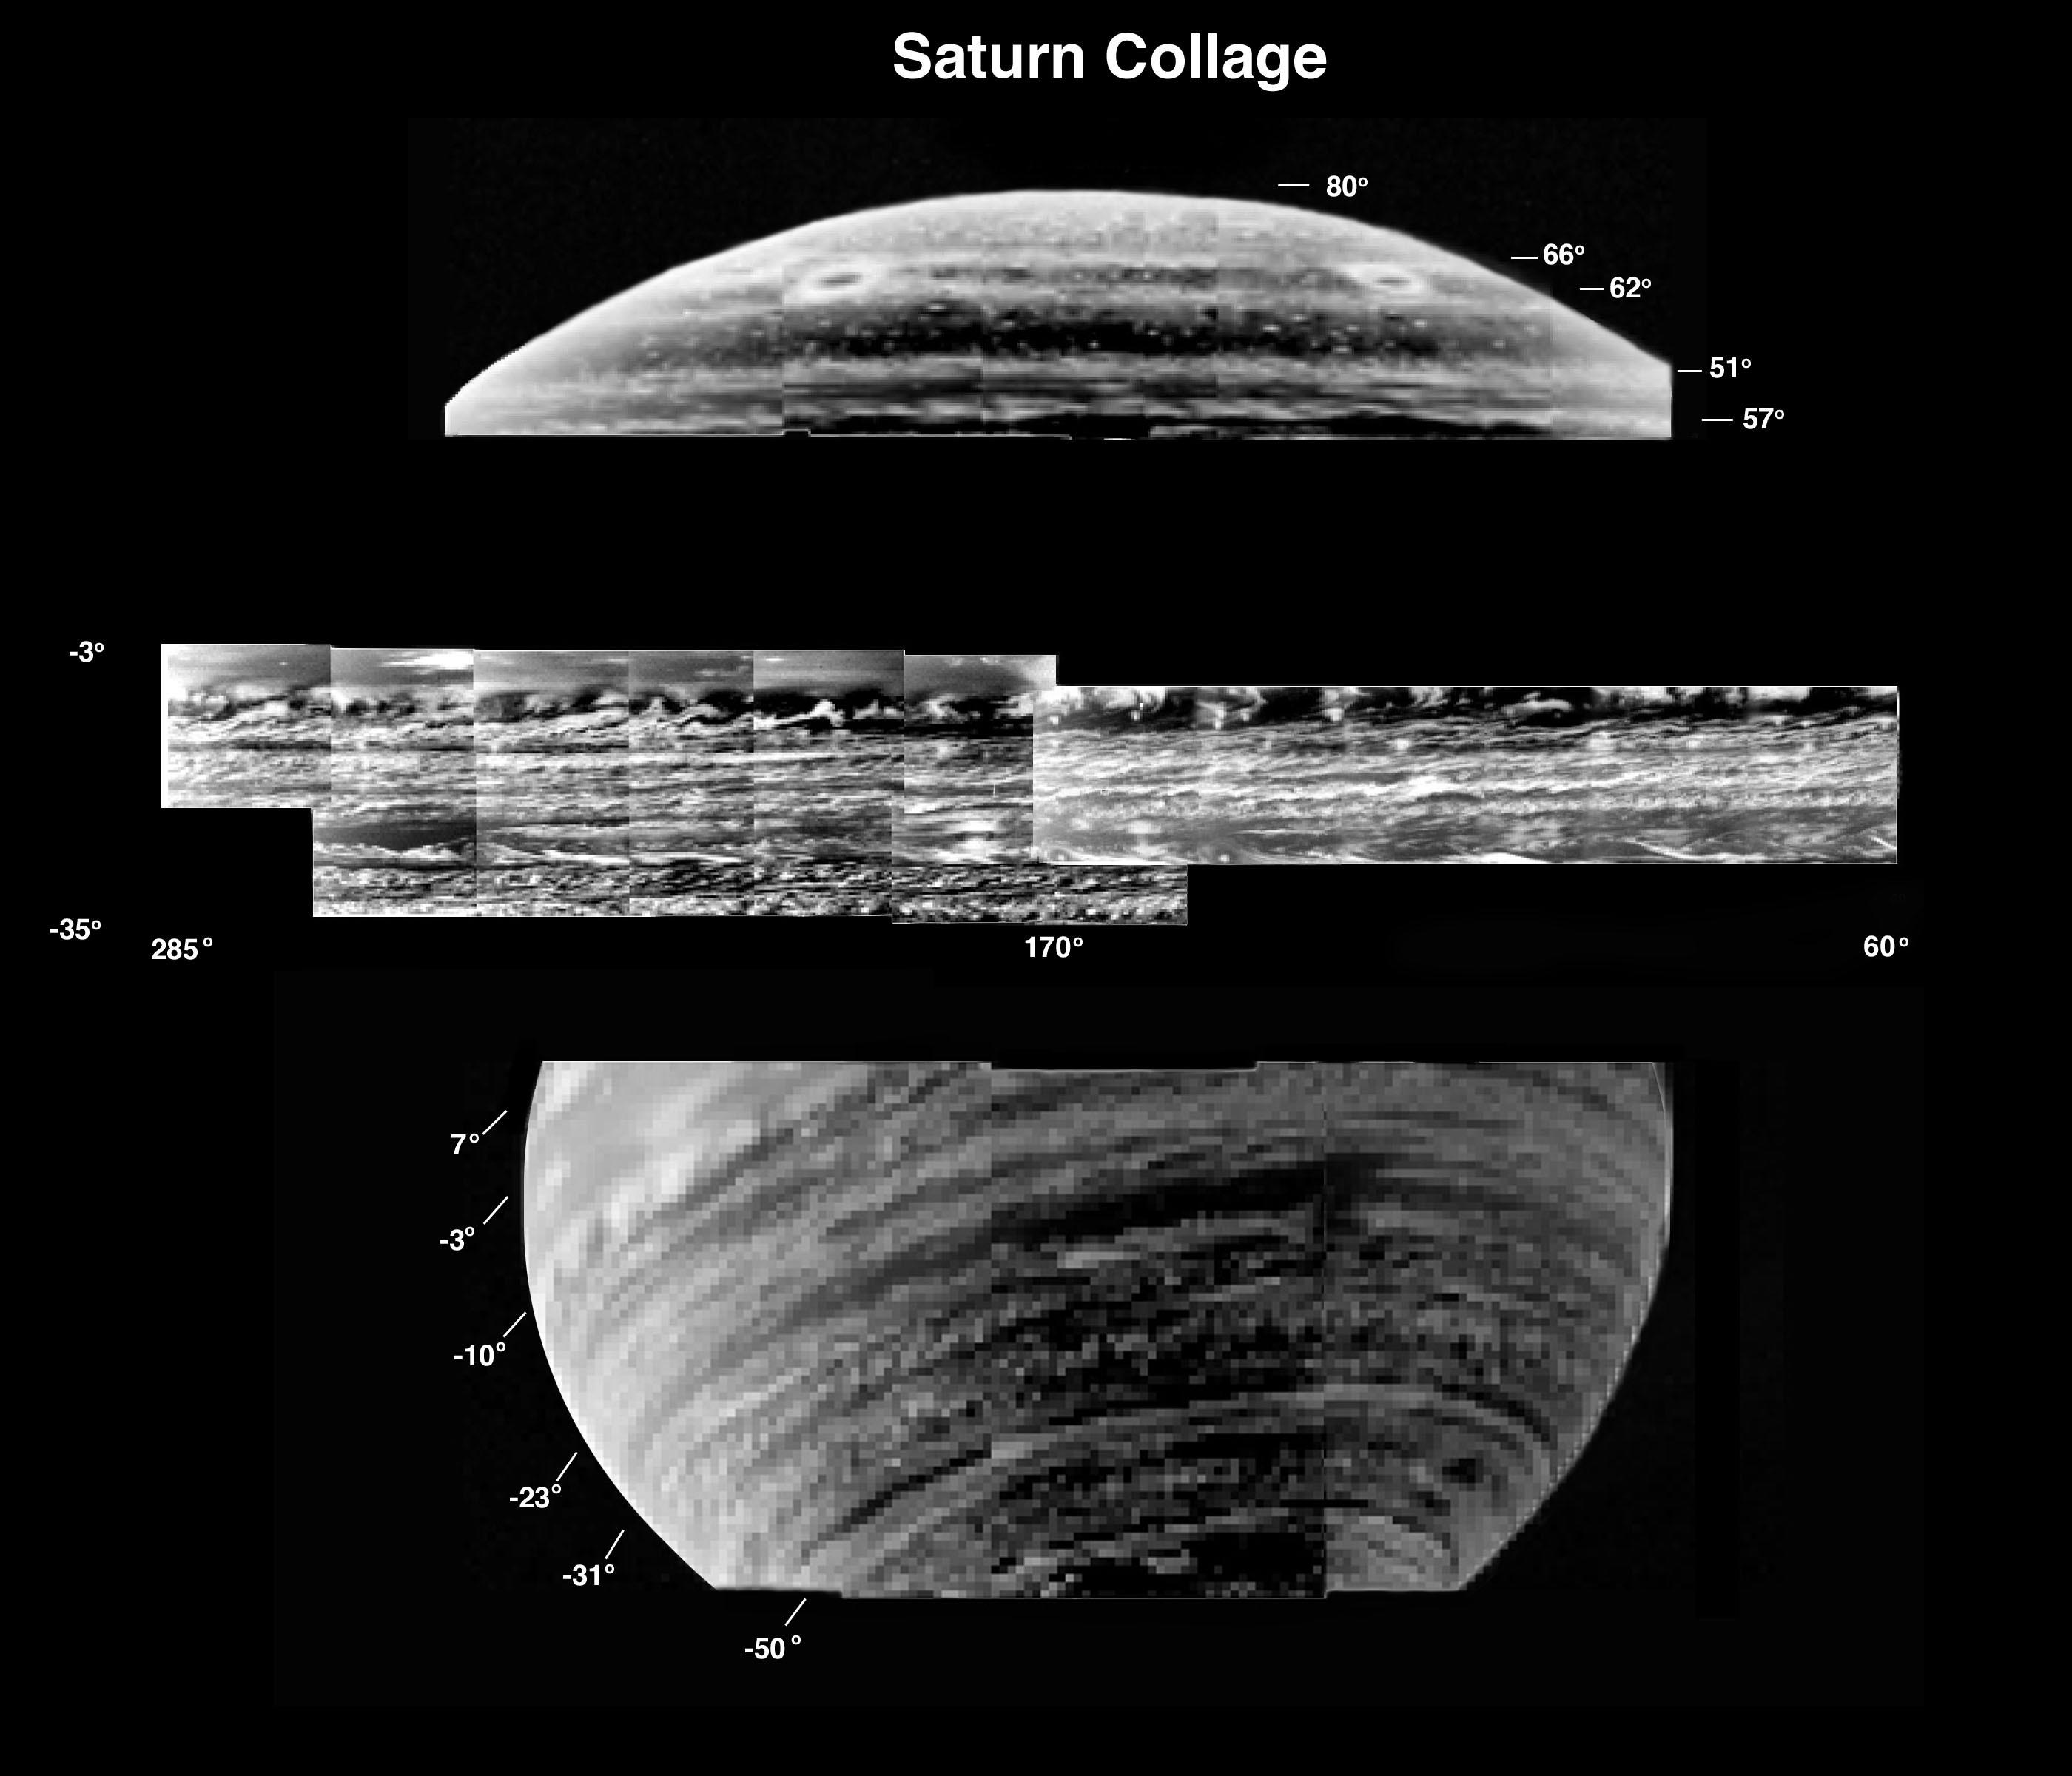 This is a collection of the most detailed images of deep-level clouds obtained by the visual and infrared mapping spectrometer onboard the Cassini spacecraft. 